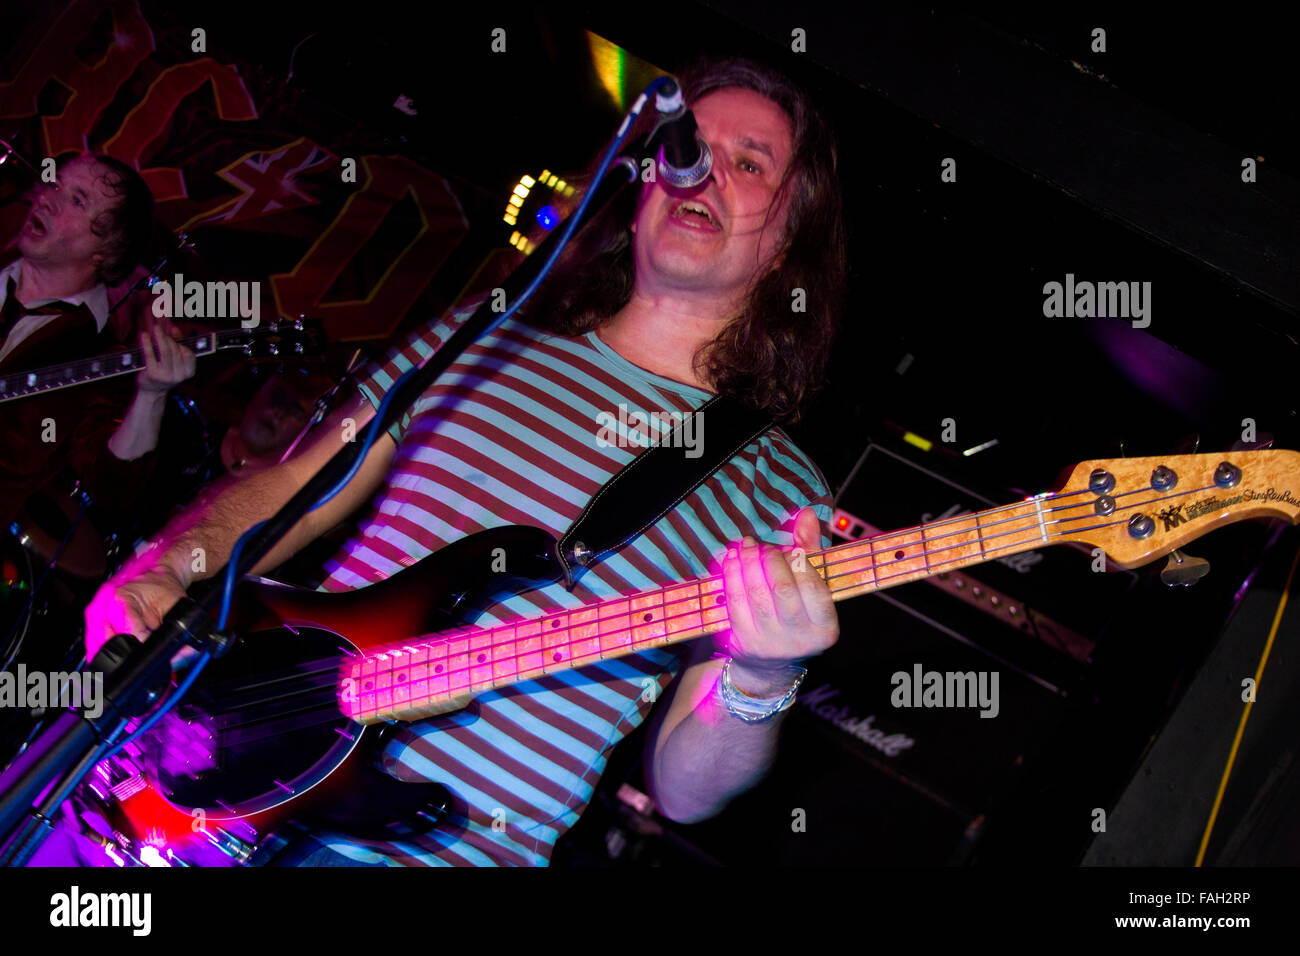 Dundee, Tayside, Scotland, UK, December 29th 2015. AC/DC Tribute rock band “AC/DC UK” play live at the Beat Generator nightclub in Dundee. Bass guitarist Bill Bowden (Cliff Williams) and Drummer Billy Rauff (Phil Rudd). © Dundee Photographics / Alamy Live News. Stock Photo